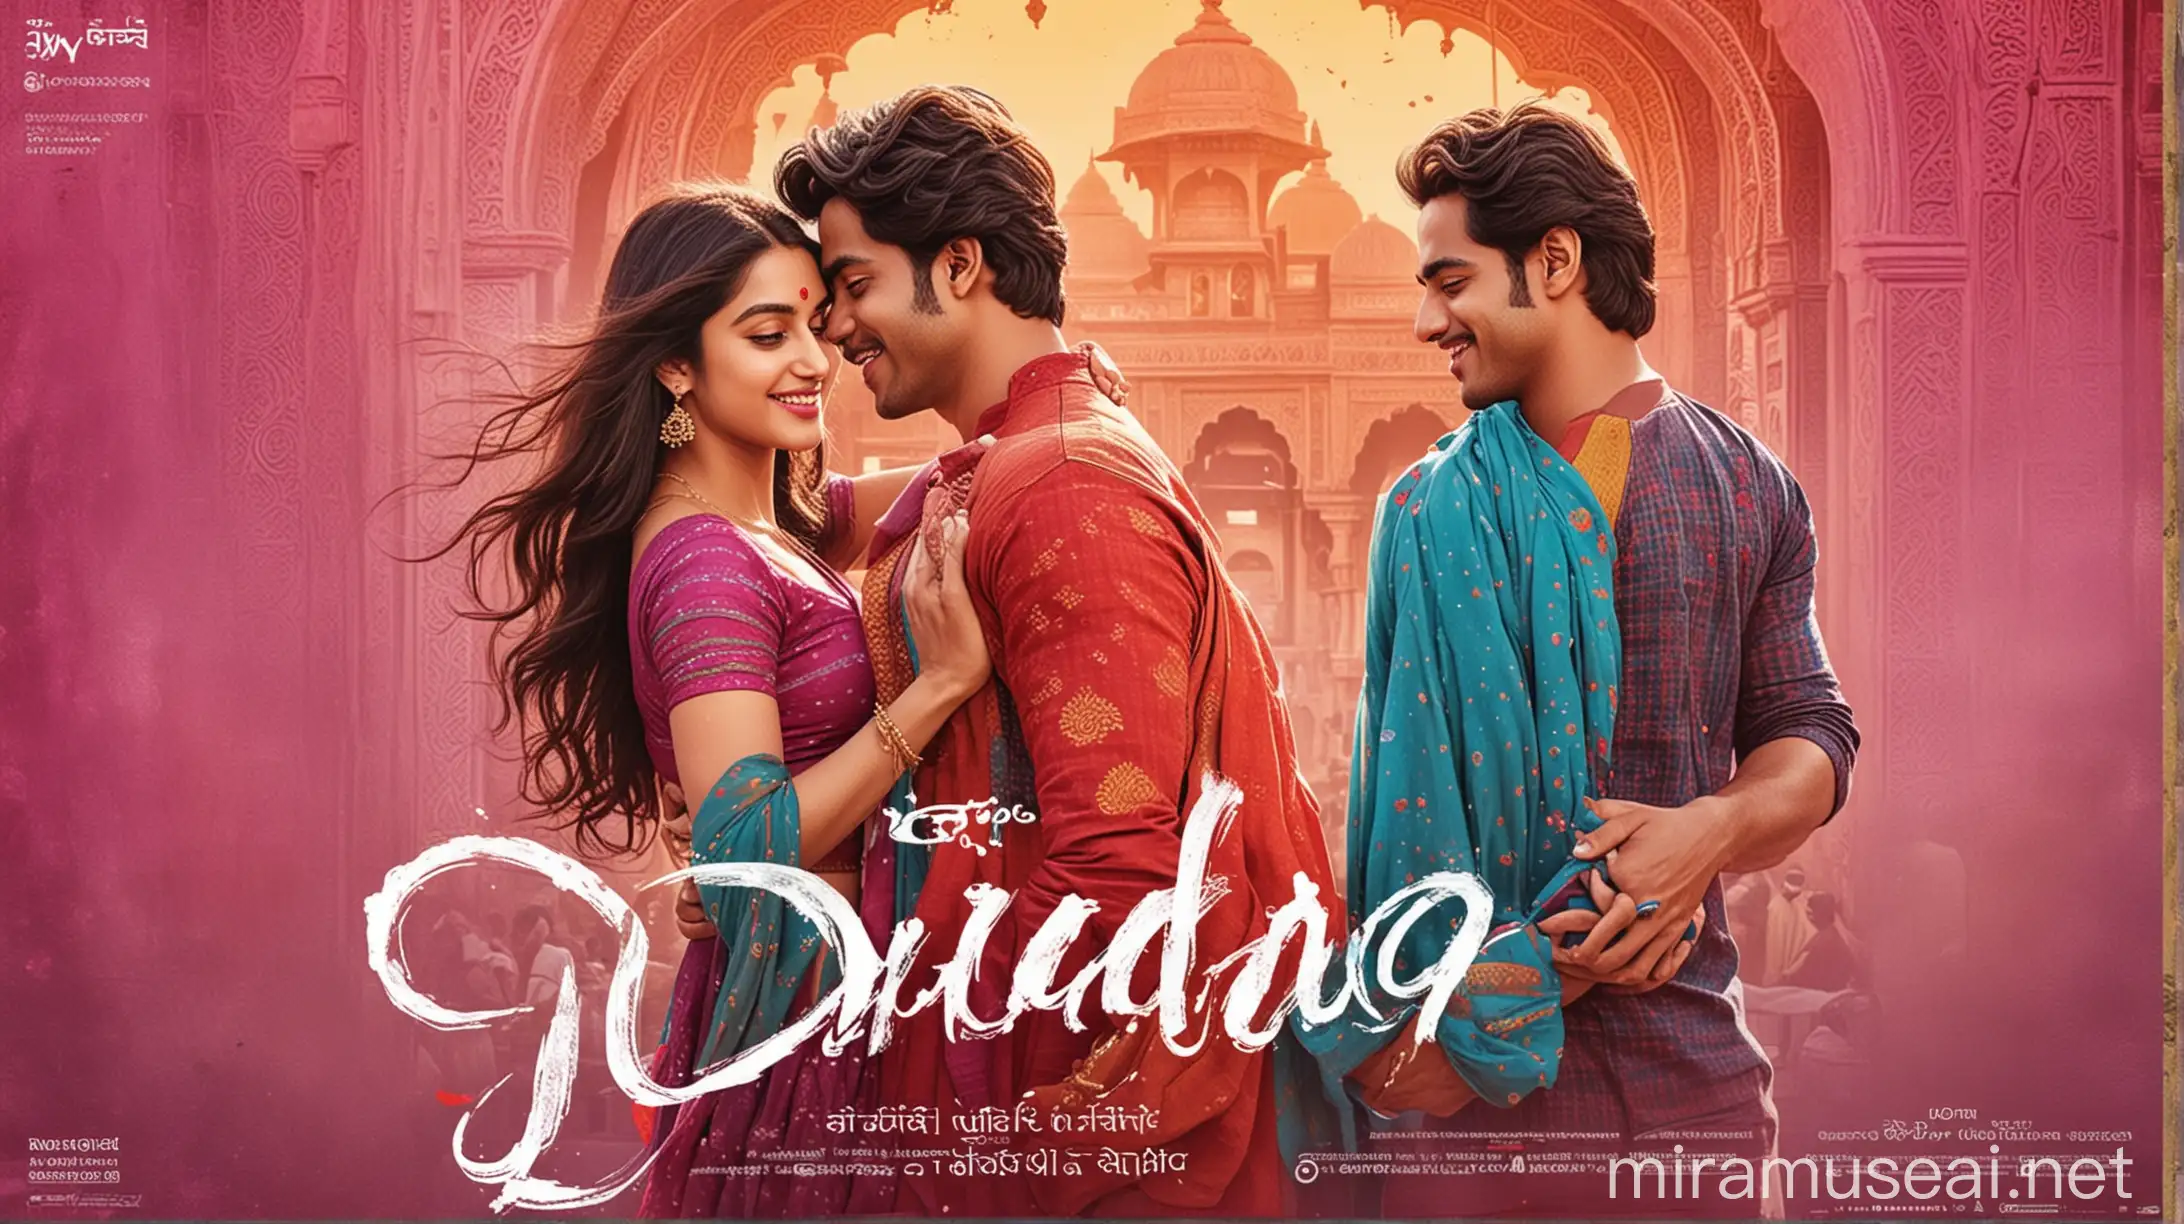 Create a Bollywood movie poster The poster should have a touch of glamour, and mystery, which draws the audience into the world of the film at first glance. , Indian Gujarati Couple Title: "Dhadak Dhadak Dil Dhadke"

